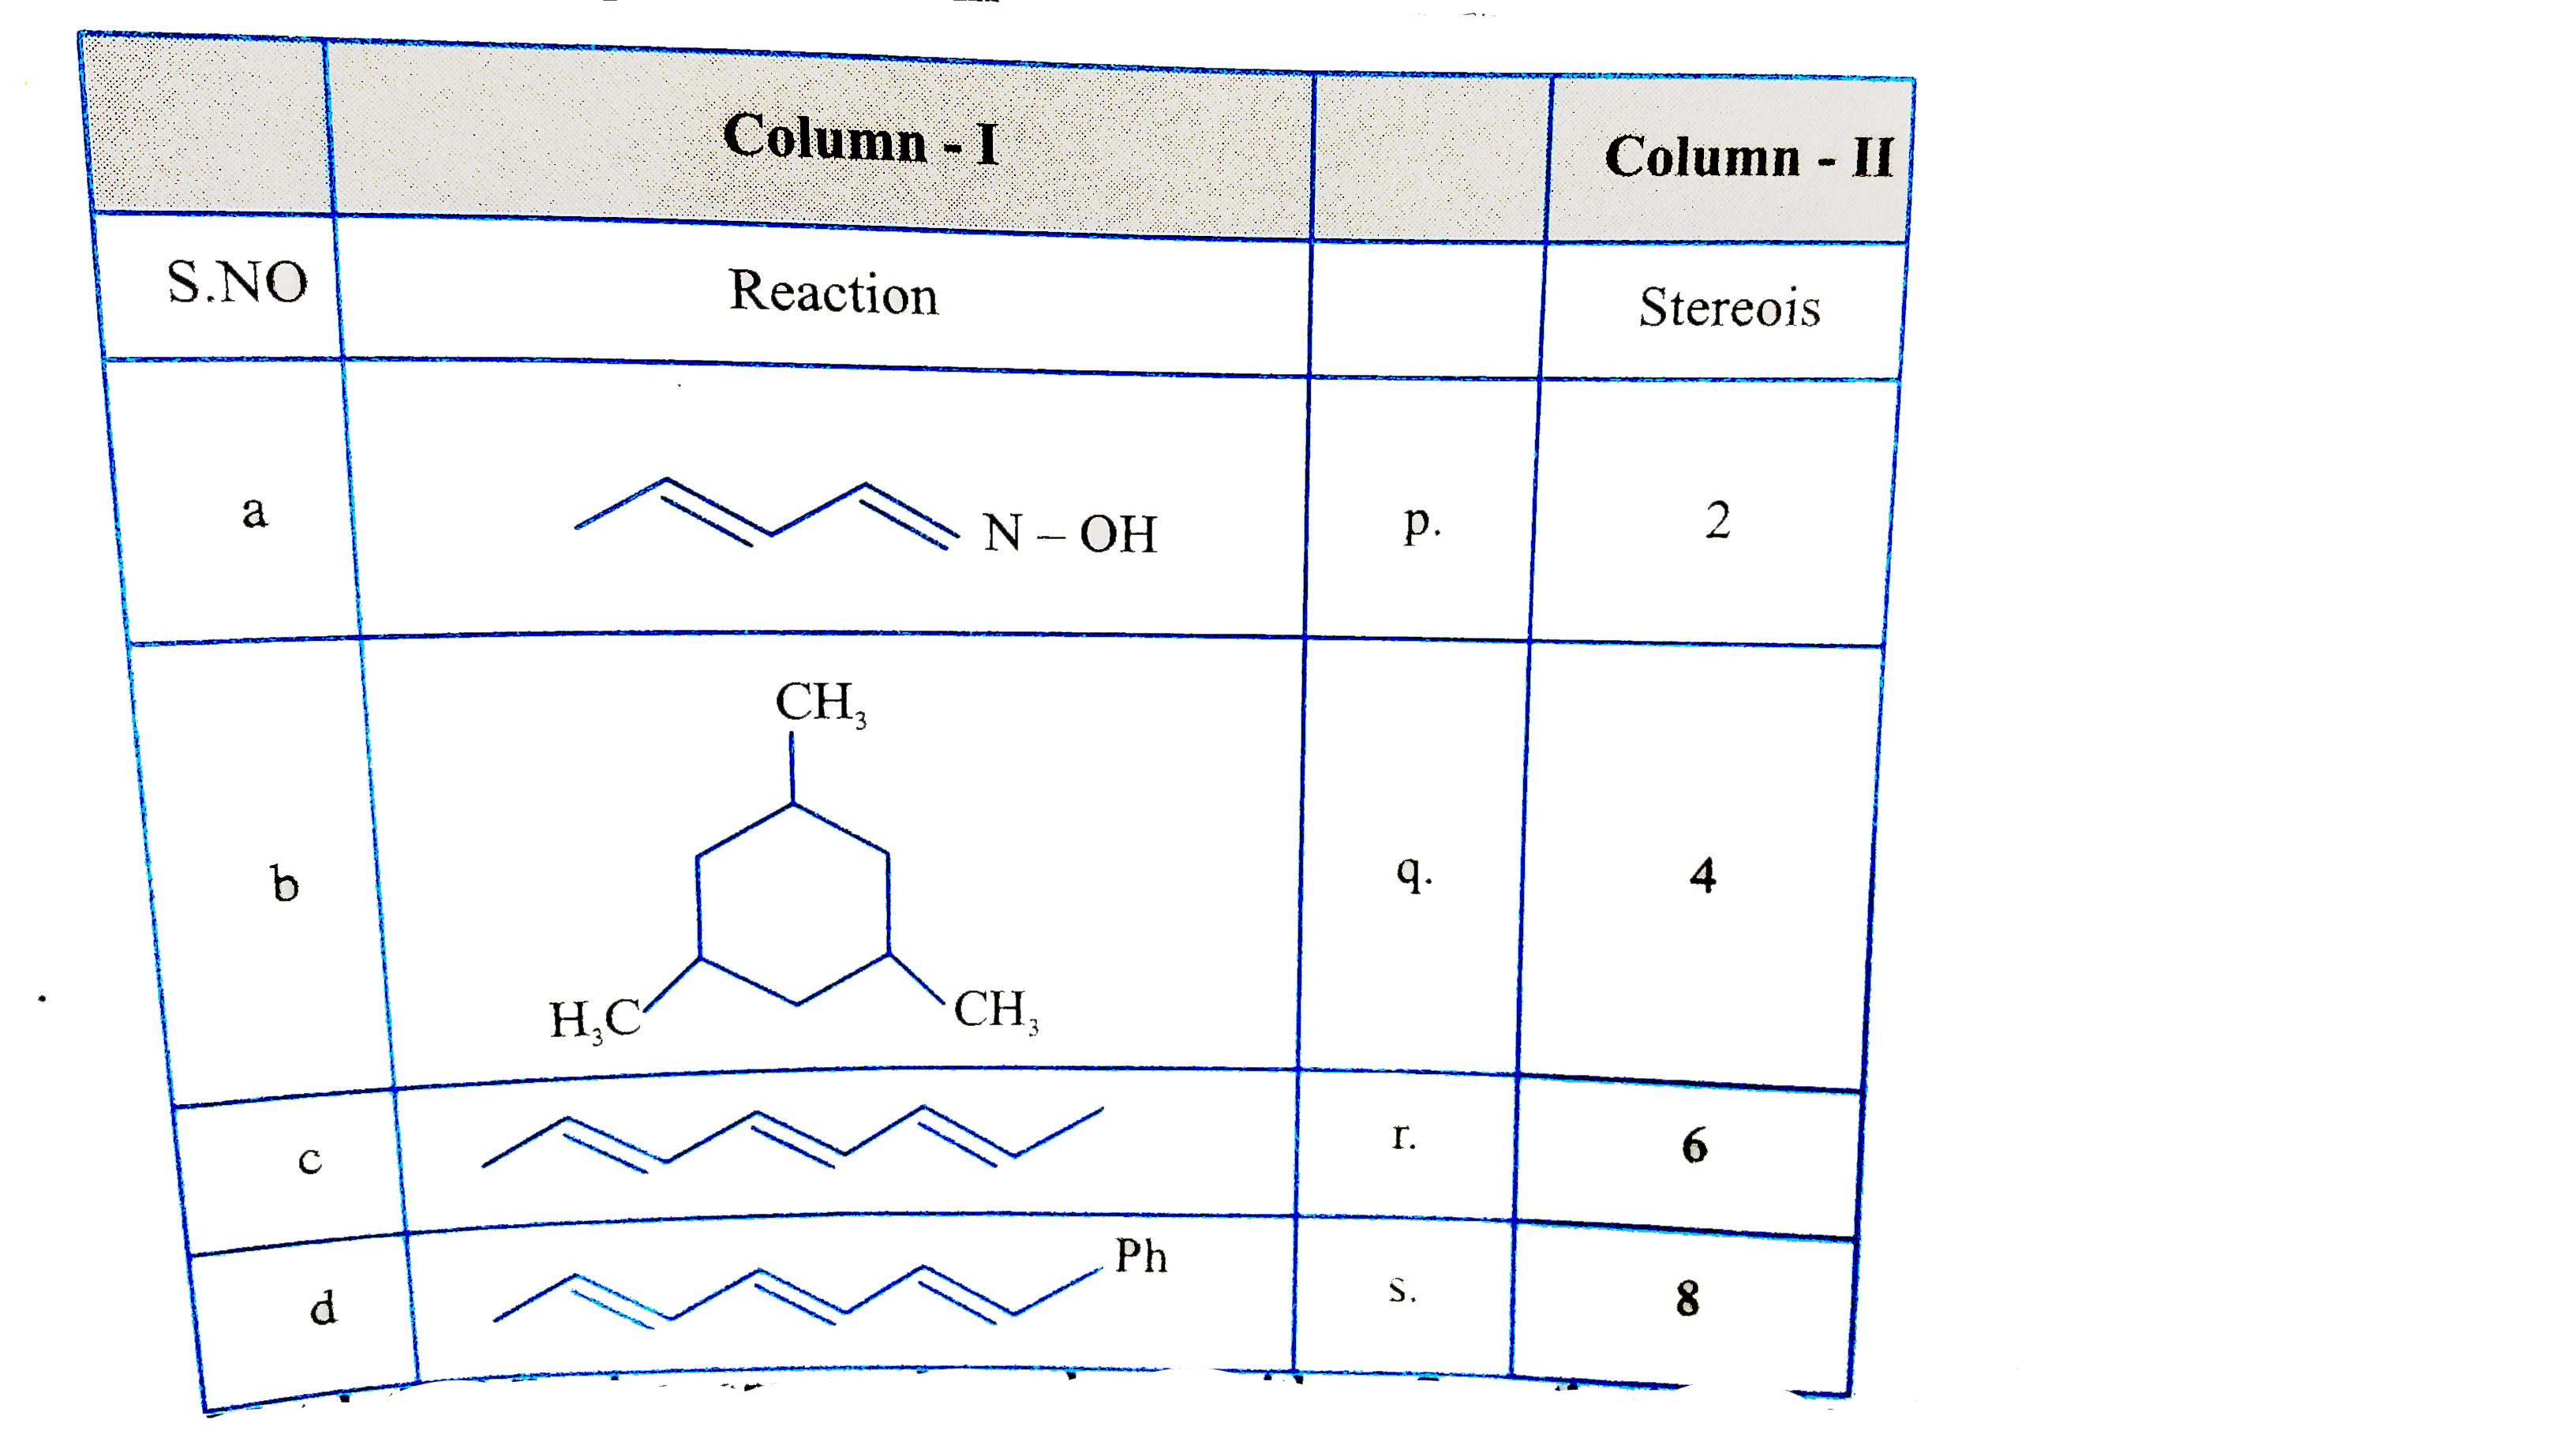 Match the following compounds in colummn I with number of isomers in Column II